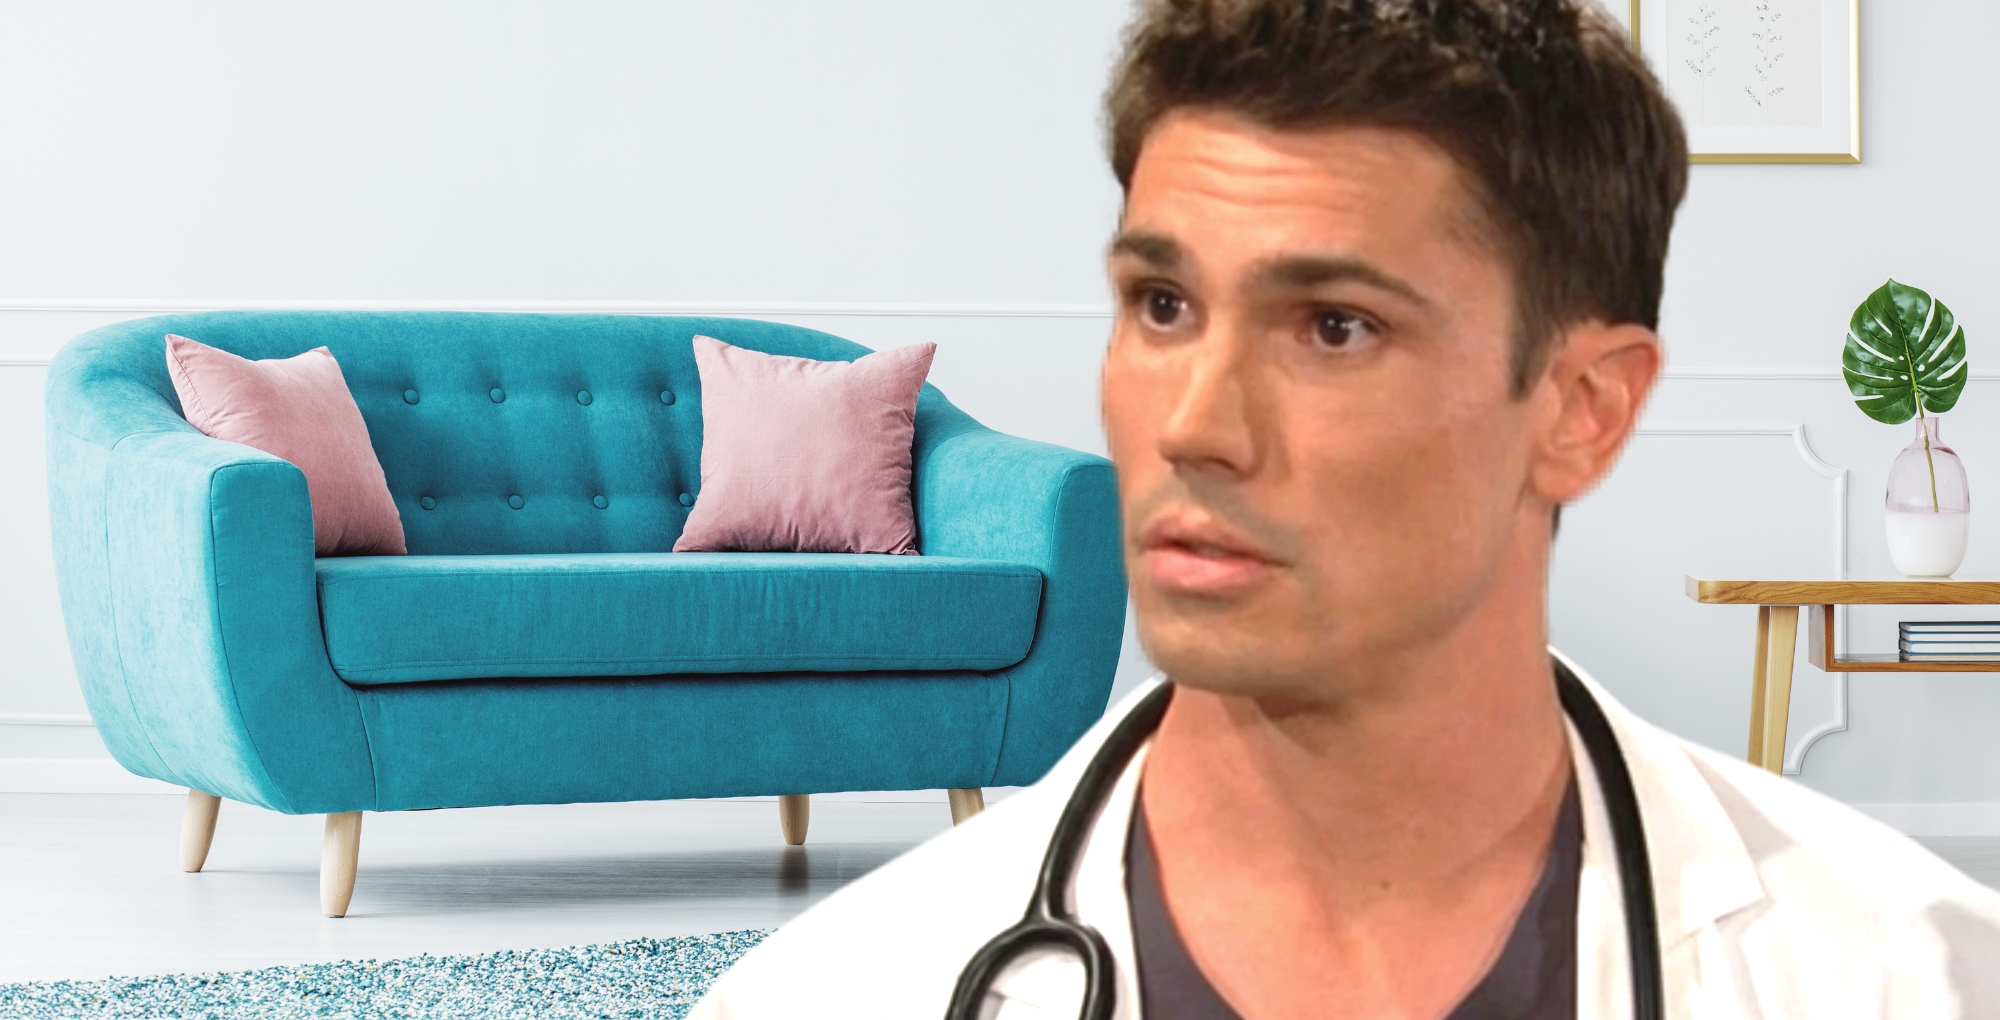 finn finnegan from bold and the beautiful is on the soap hub couch.